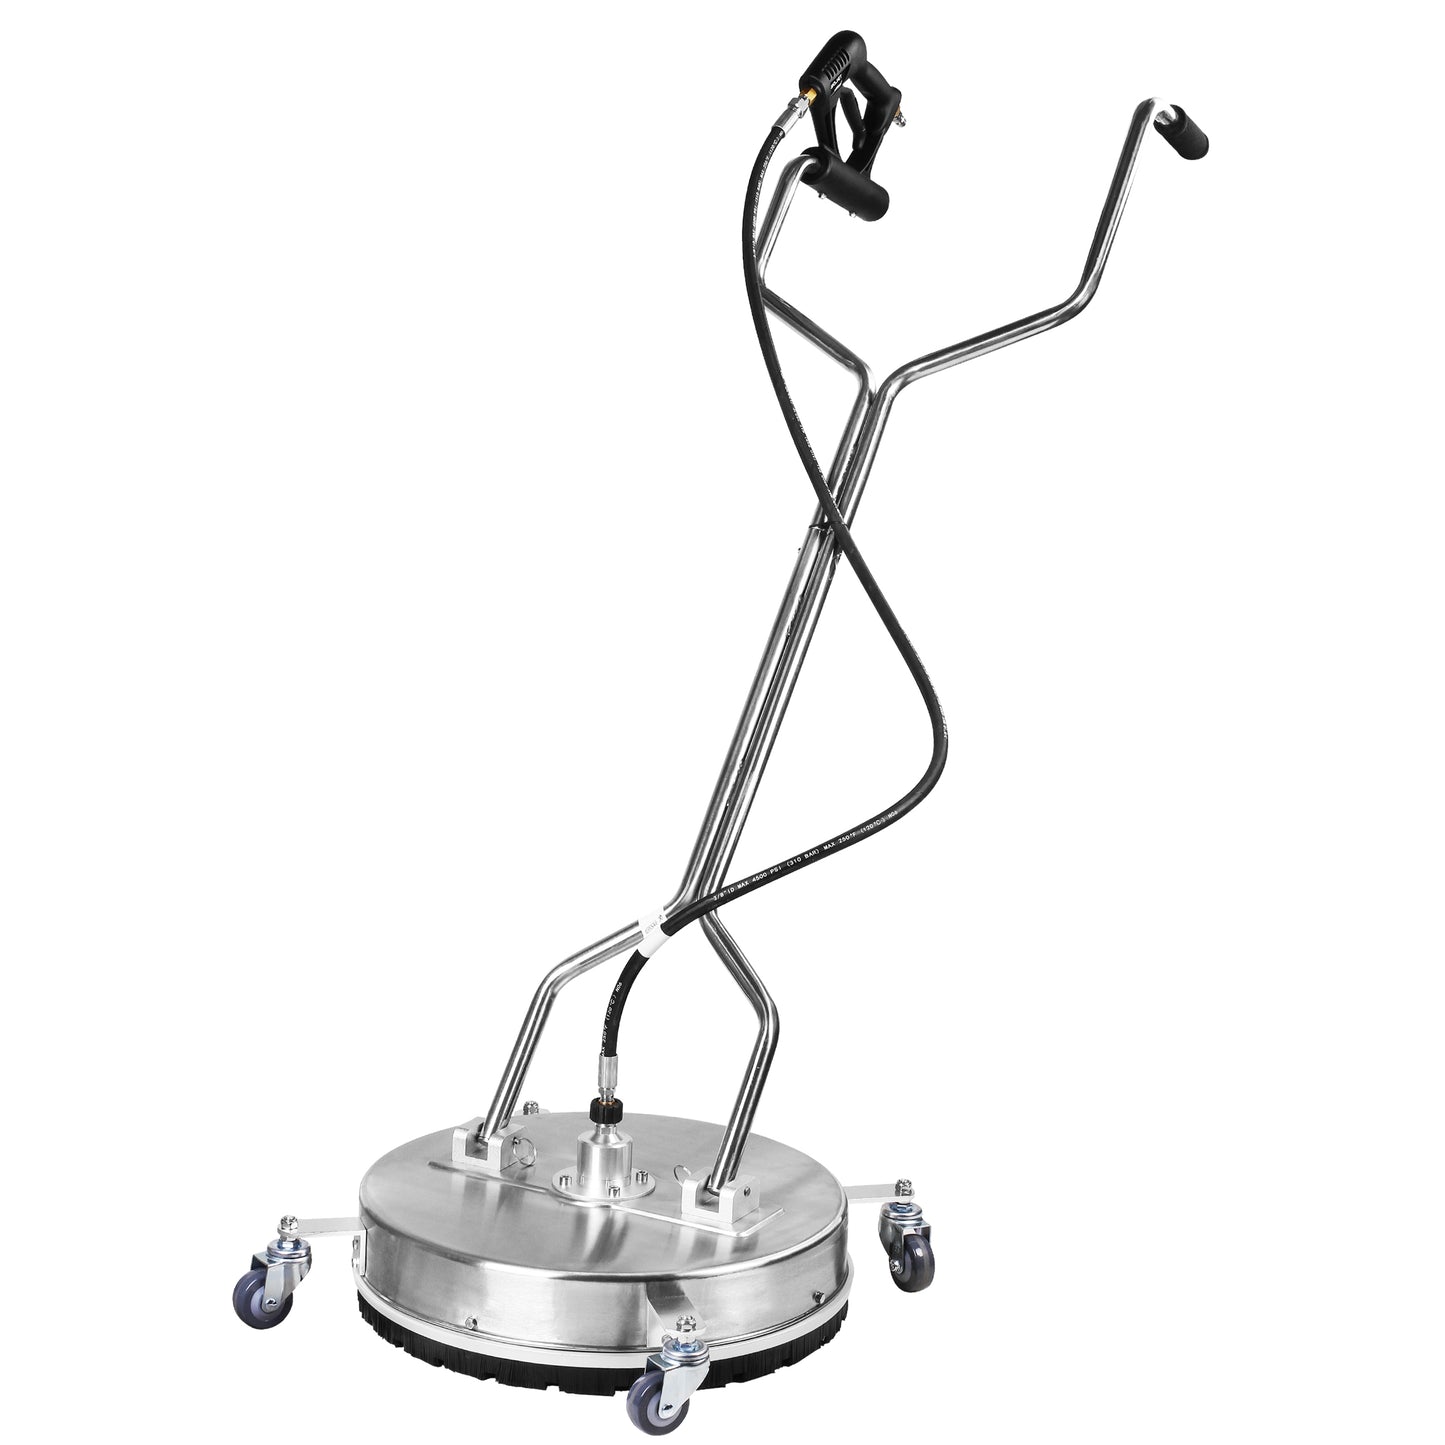 WOJET 20" Pressure Washer Surface Cleaner, 4500 Psi Stainless Steel Power Washer Attachment for Driveway Cleaning PA7605